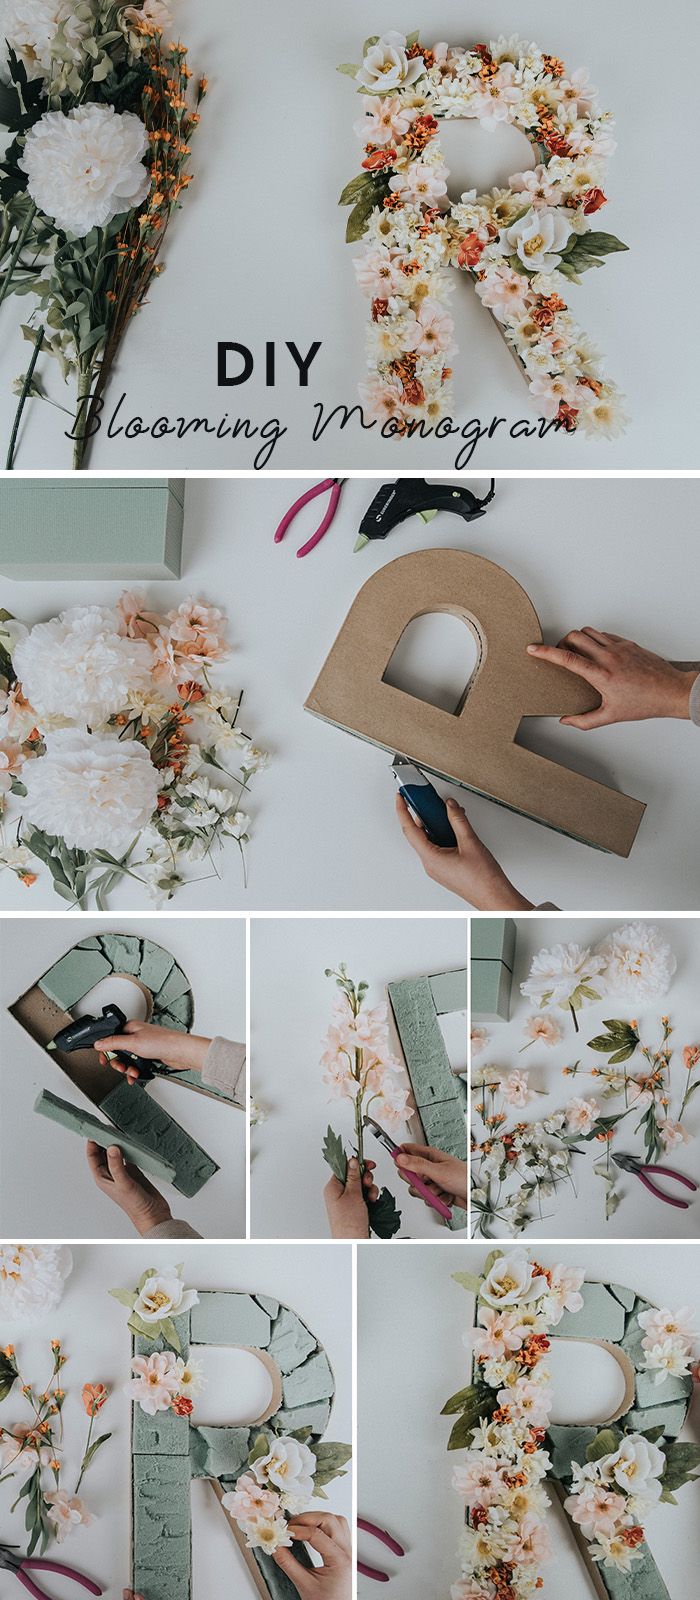 diy floral monogram wreath with paper flowers and cutouts to make it look like the letter d